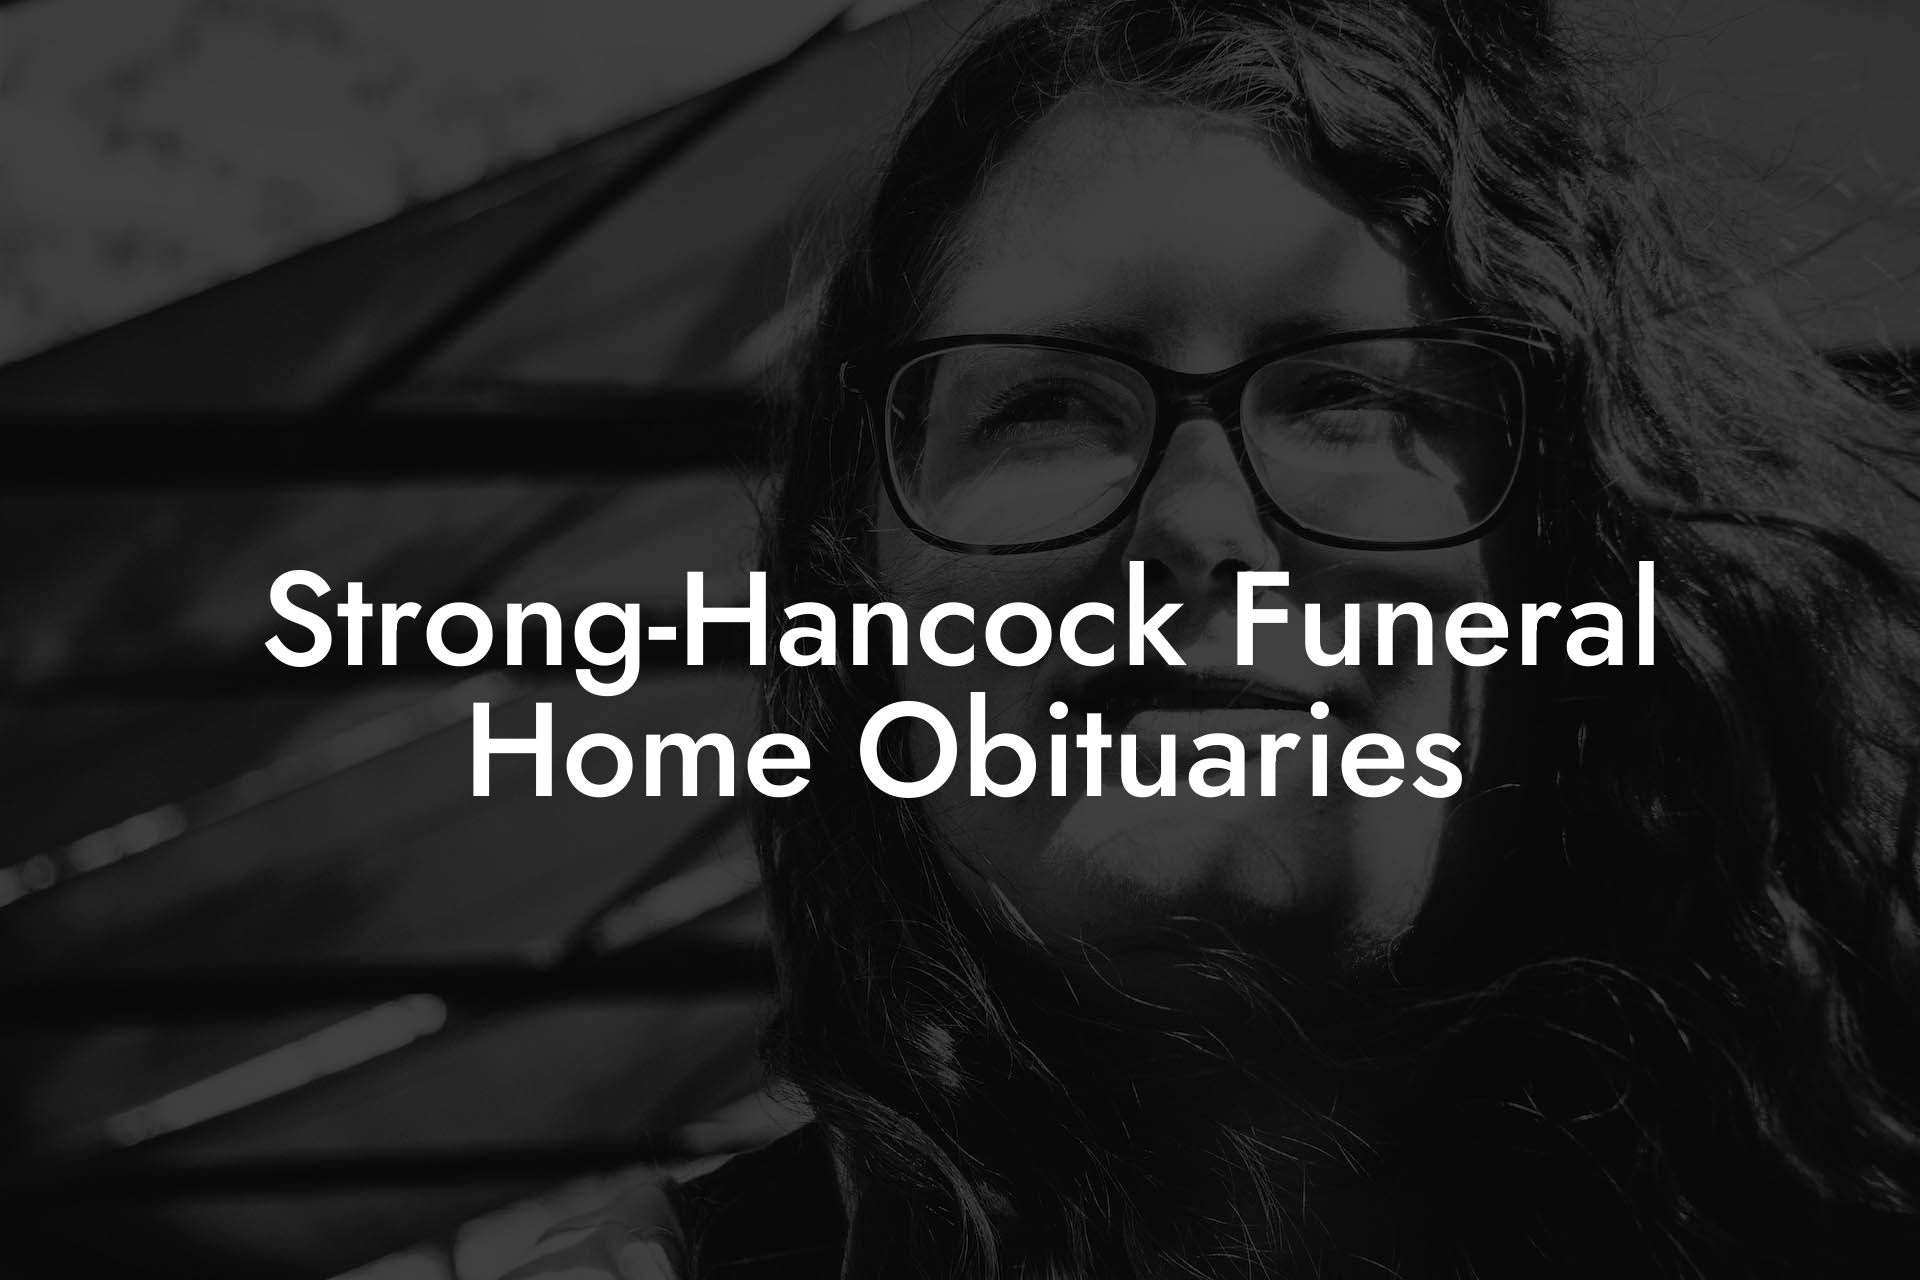 Strong-Hancock Funeral Home Obituaries